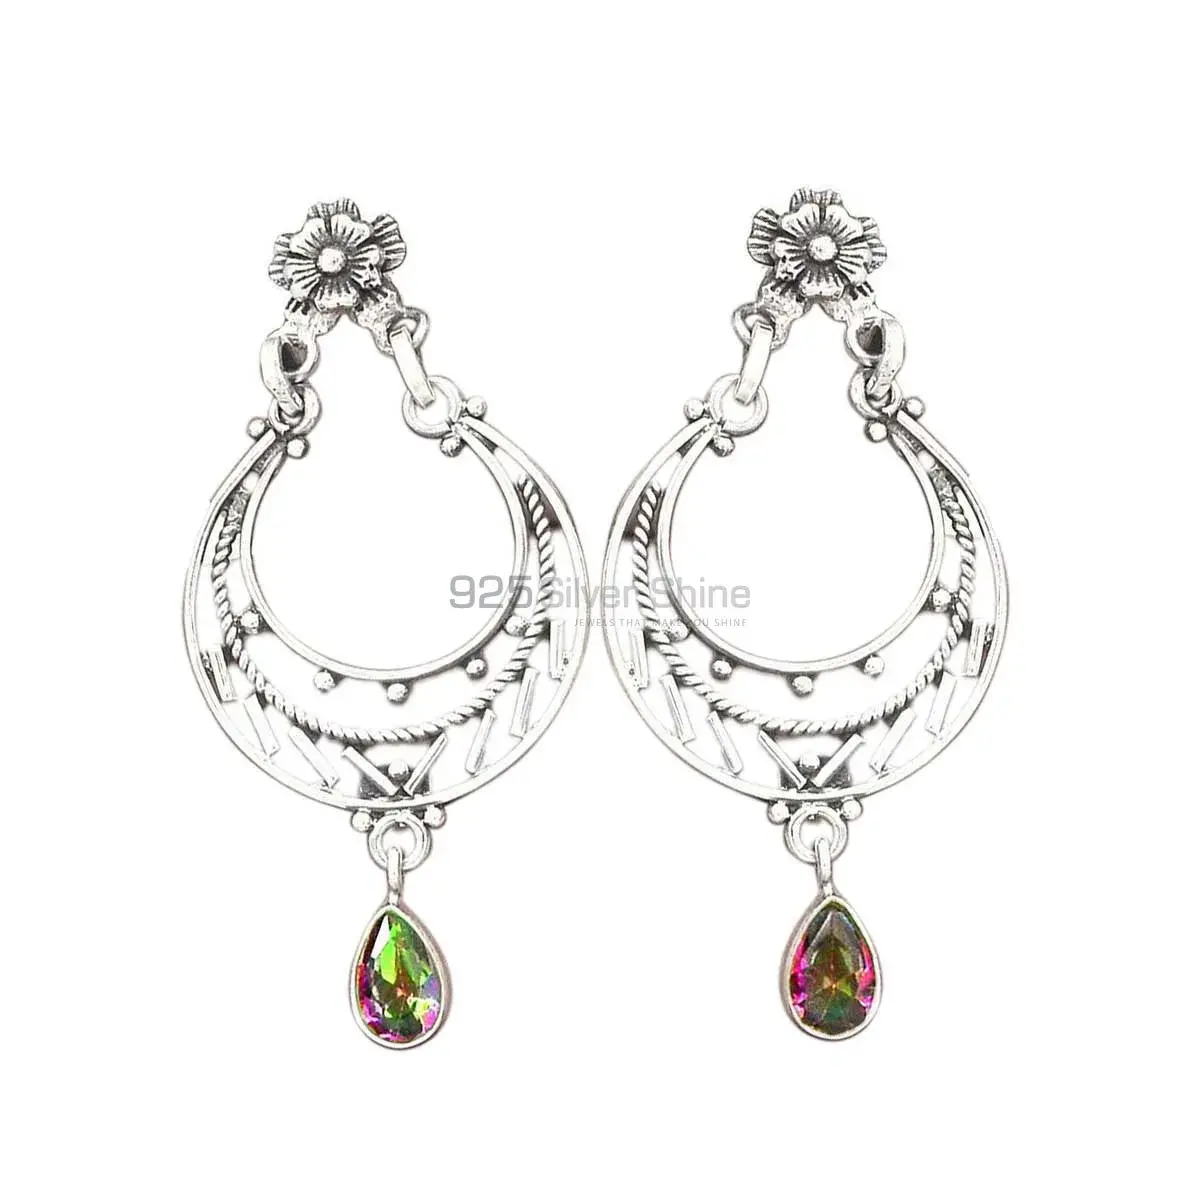 Affordable 925 Sterling Silver Earrings Wholesaler In Chrome Diopside Gemstone Jewelry 925SE3110